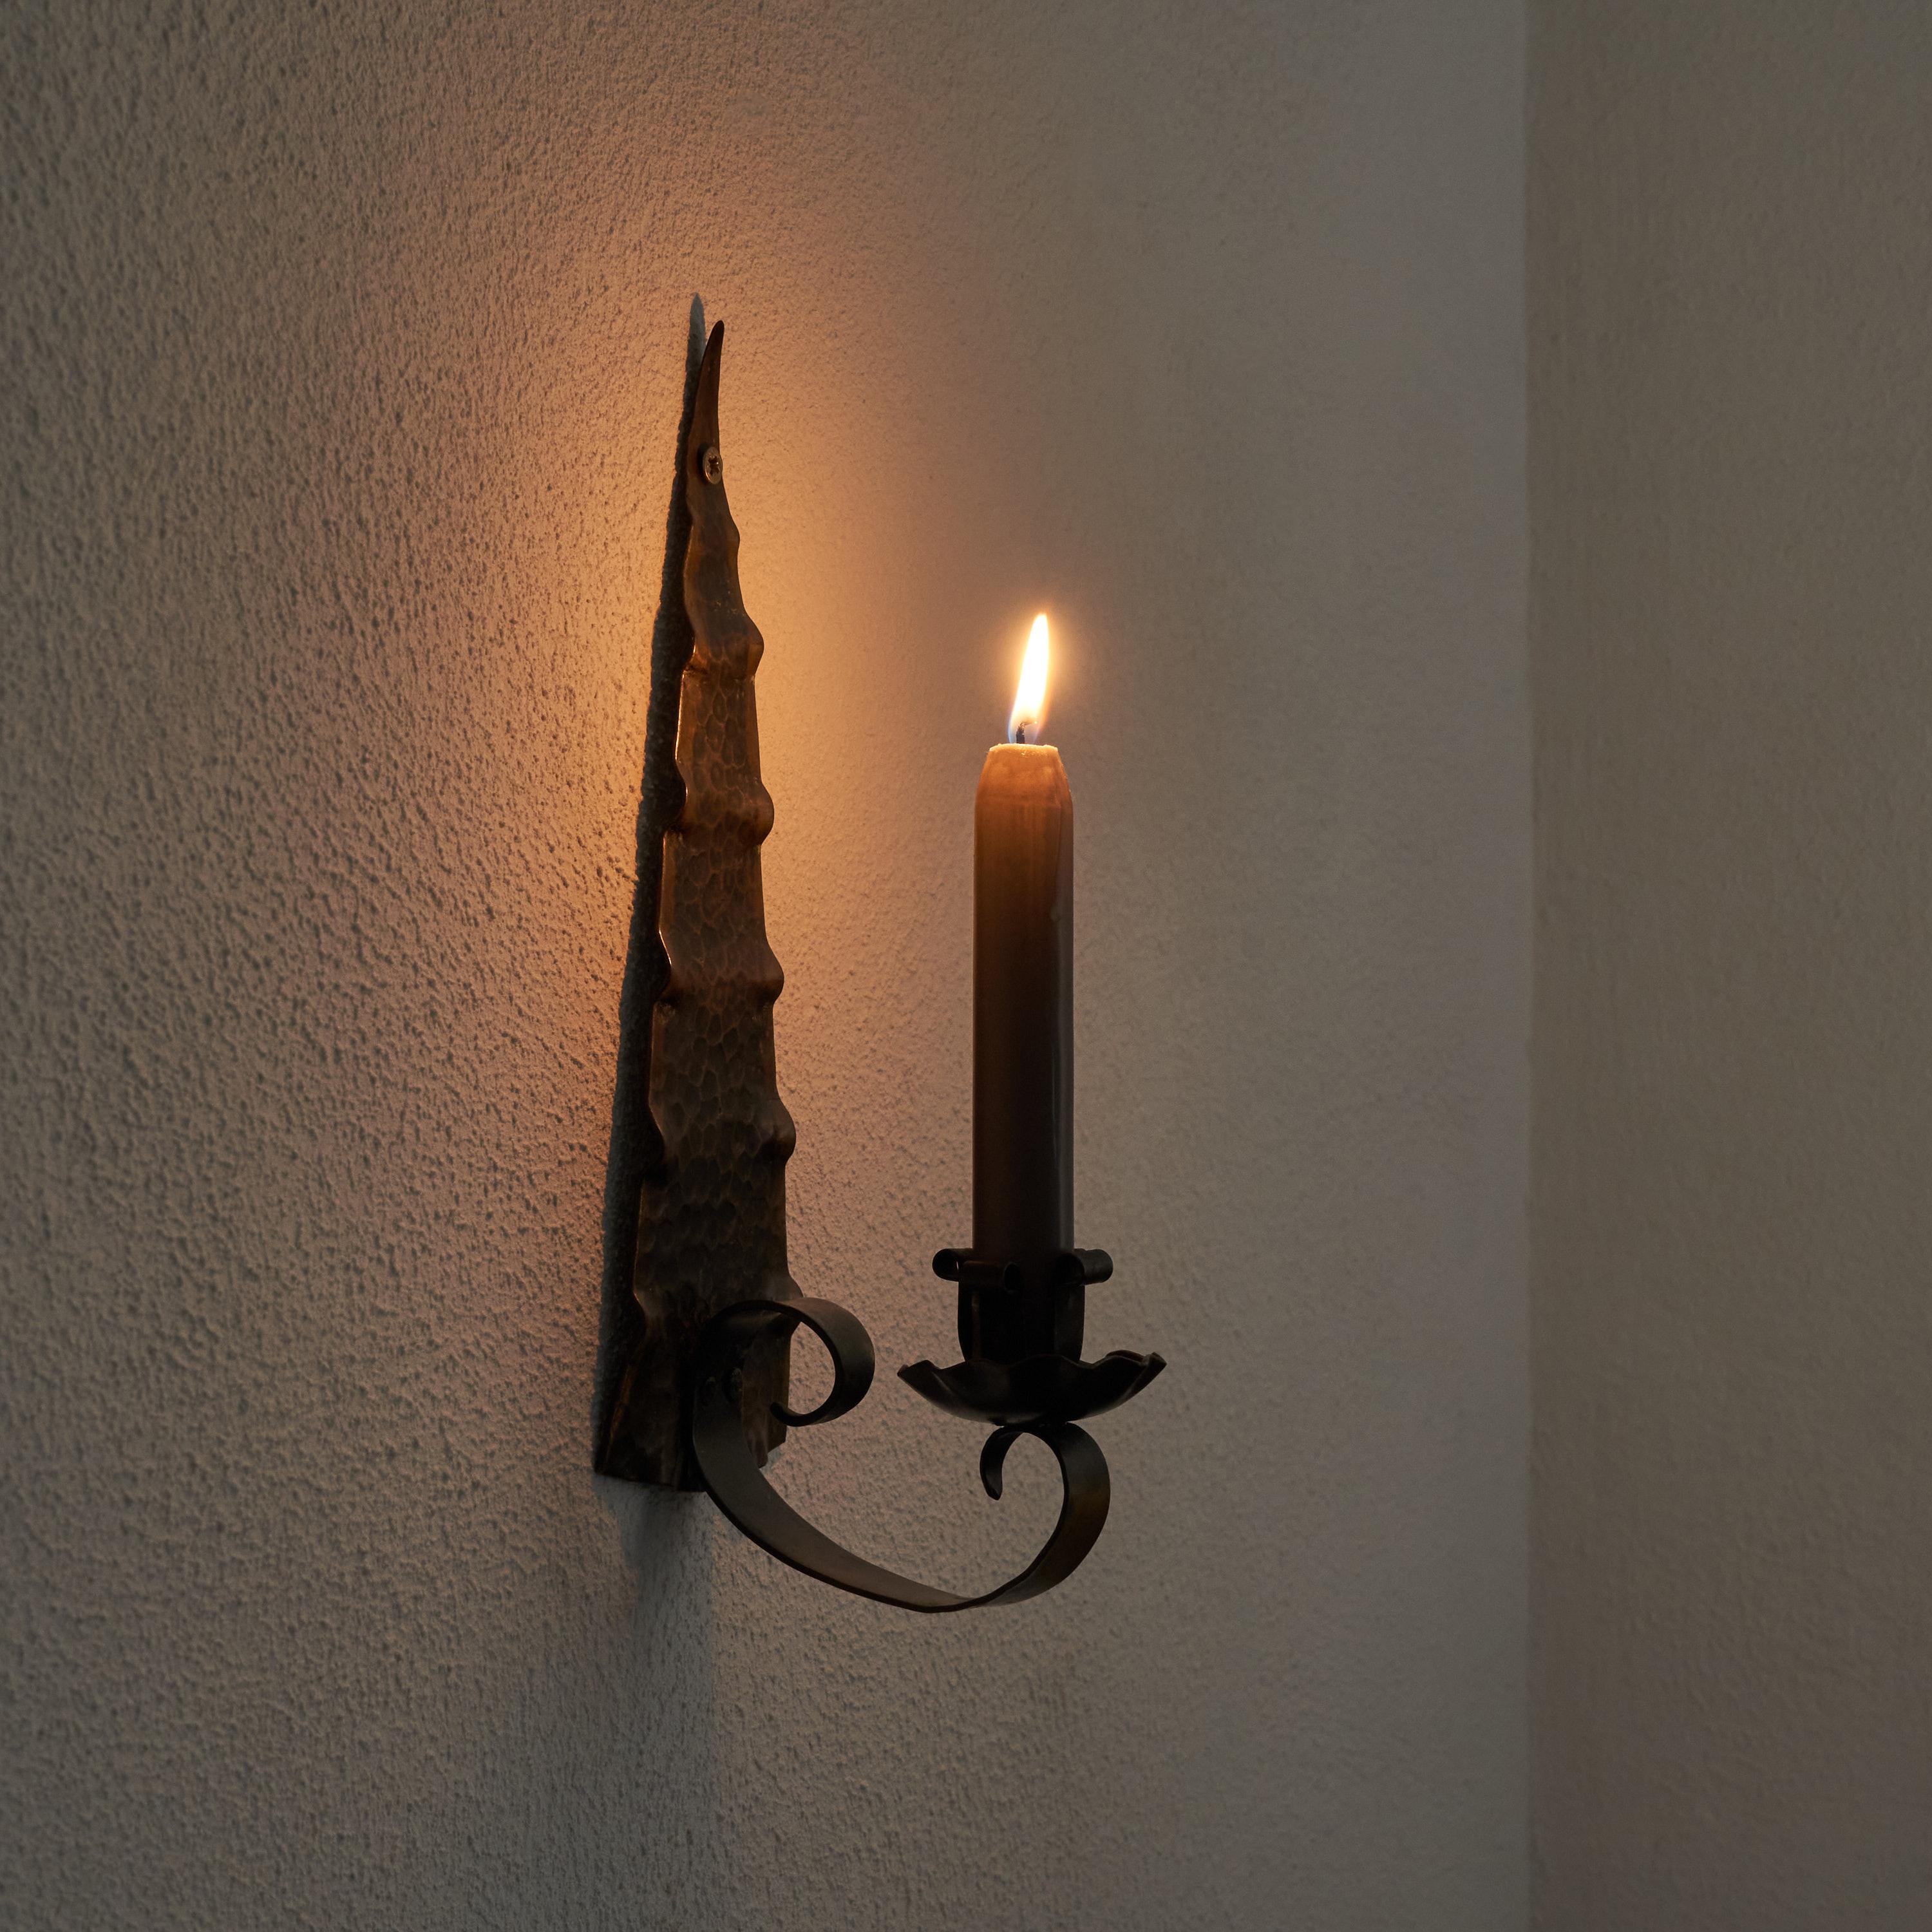 Hand-Crafted Art Deco Candle Sconce in Hand Hammered Copper, 1920s For Sale